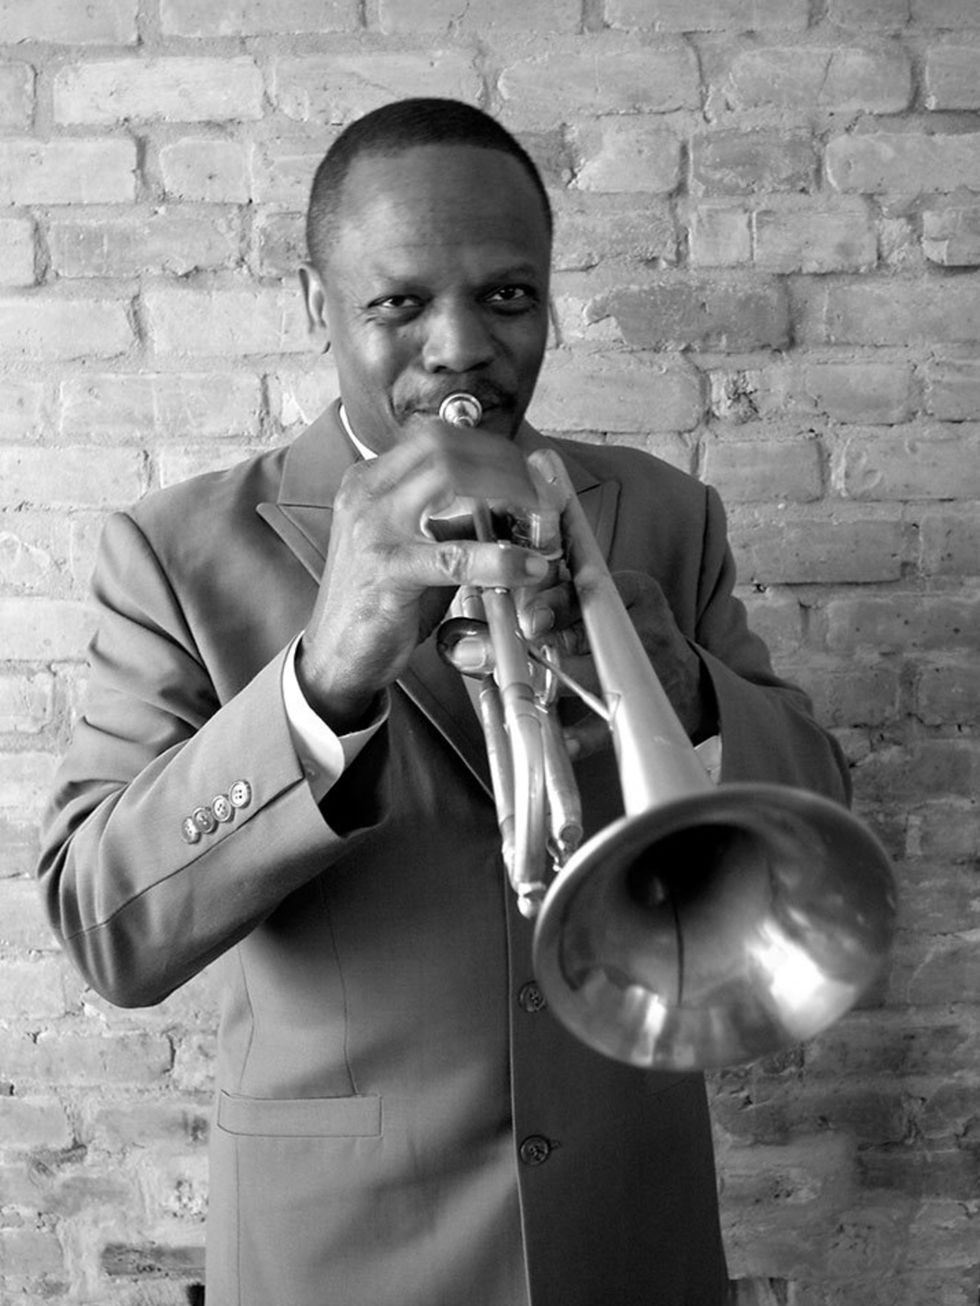 <p>MUSIC: Leroy Jones</p>

<p>It's fair to say that London (us included) has been obsessed with all things New Orleans of late, what with soul-food supperclubs and jazz joints springing up all over. And now the daddy of the scene, Leroy Jones, is in town 